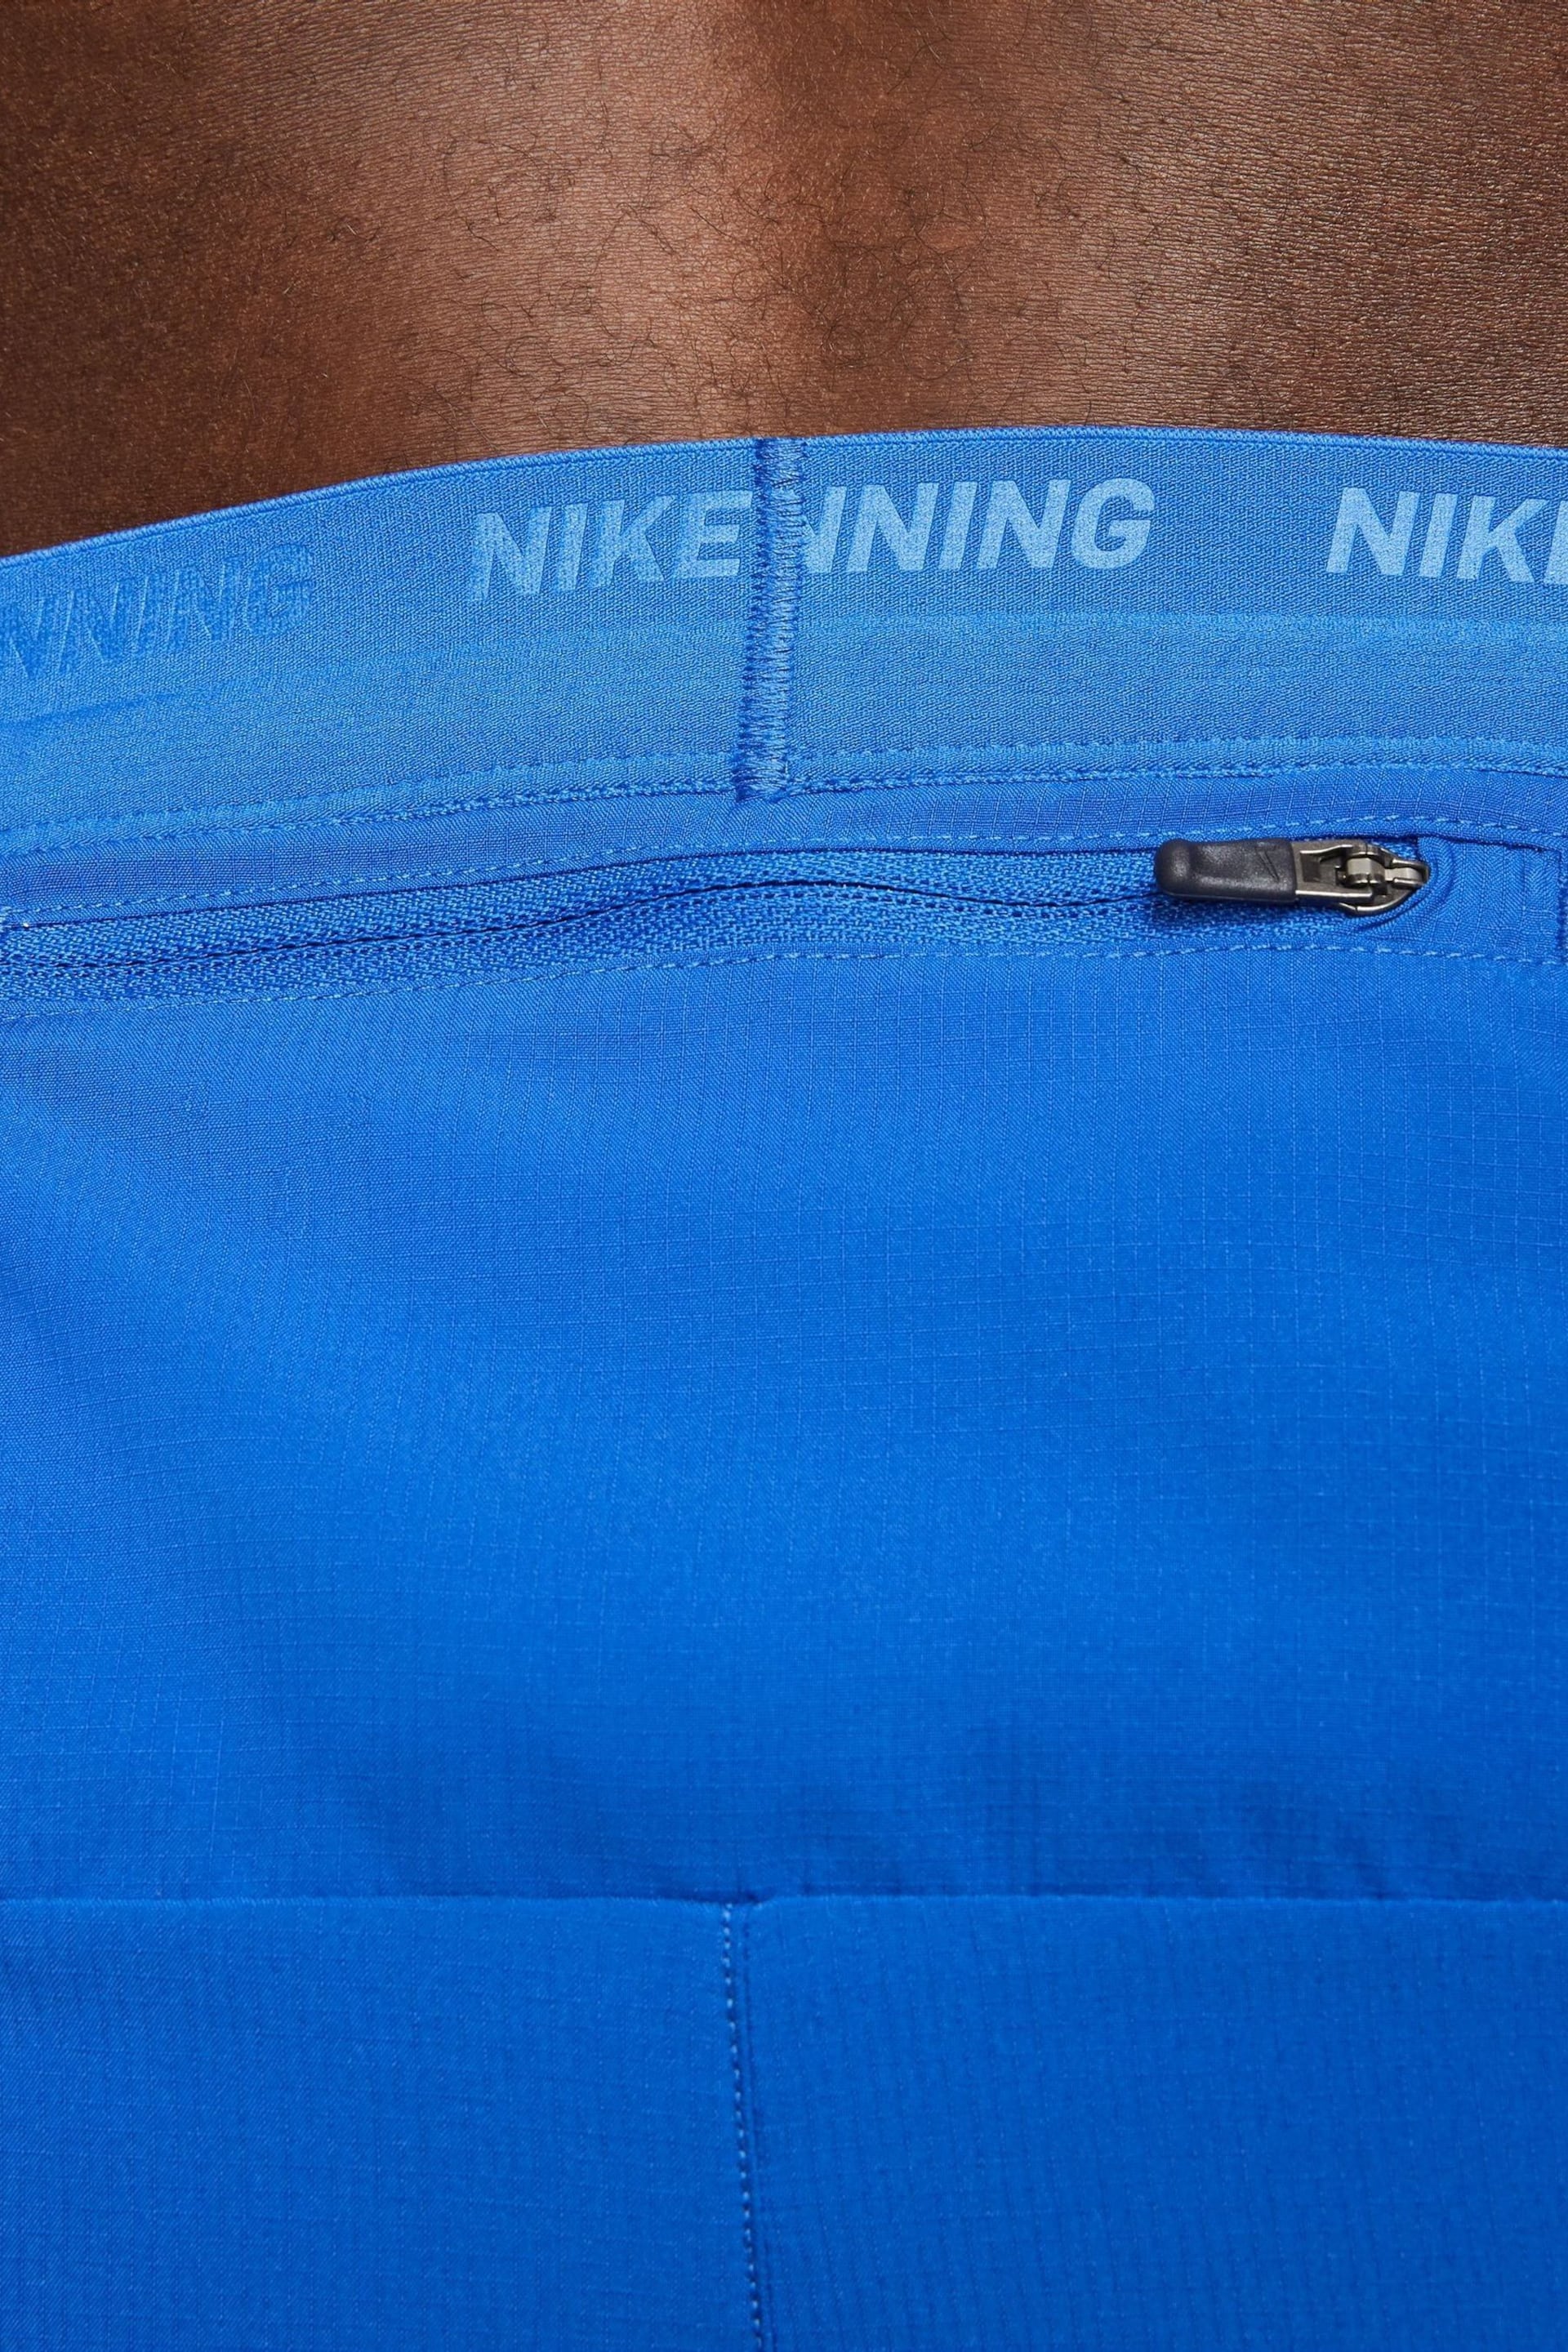 Nike Blue Dri-FIT Stride 5 Inch Running Shorts - Image 13 of 16